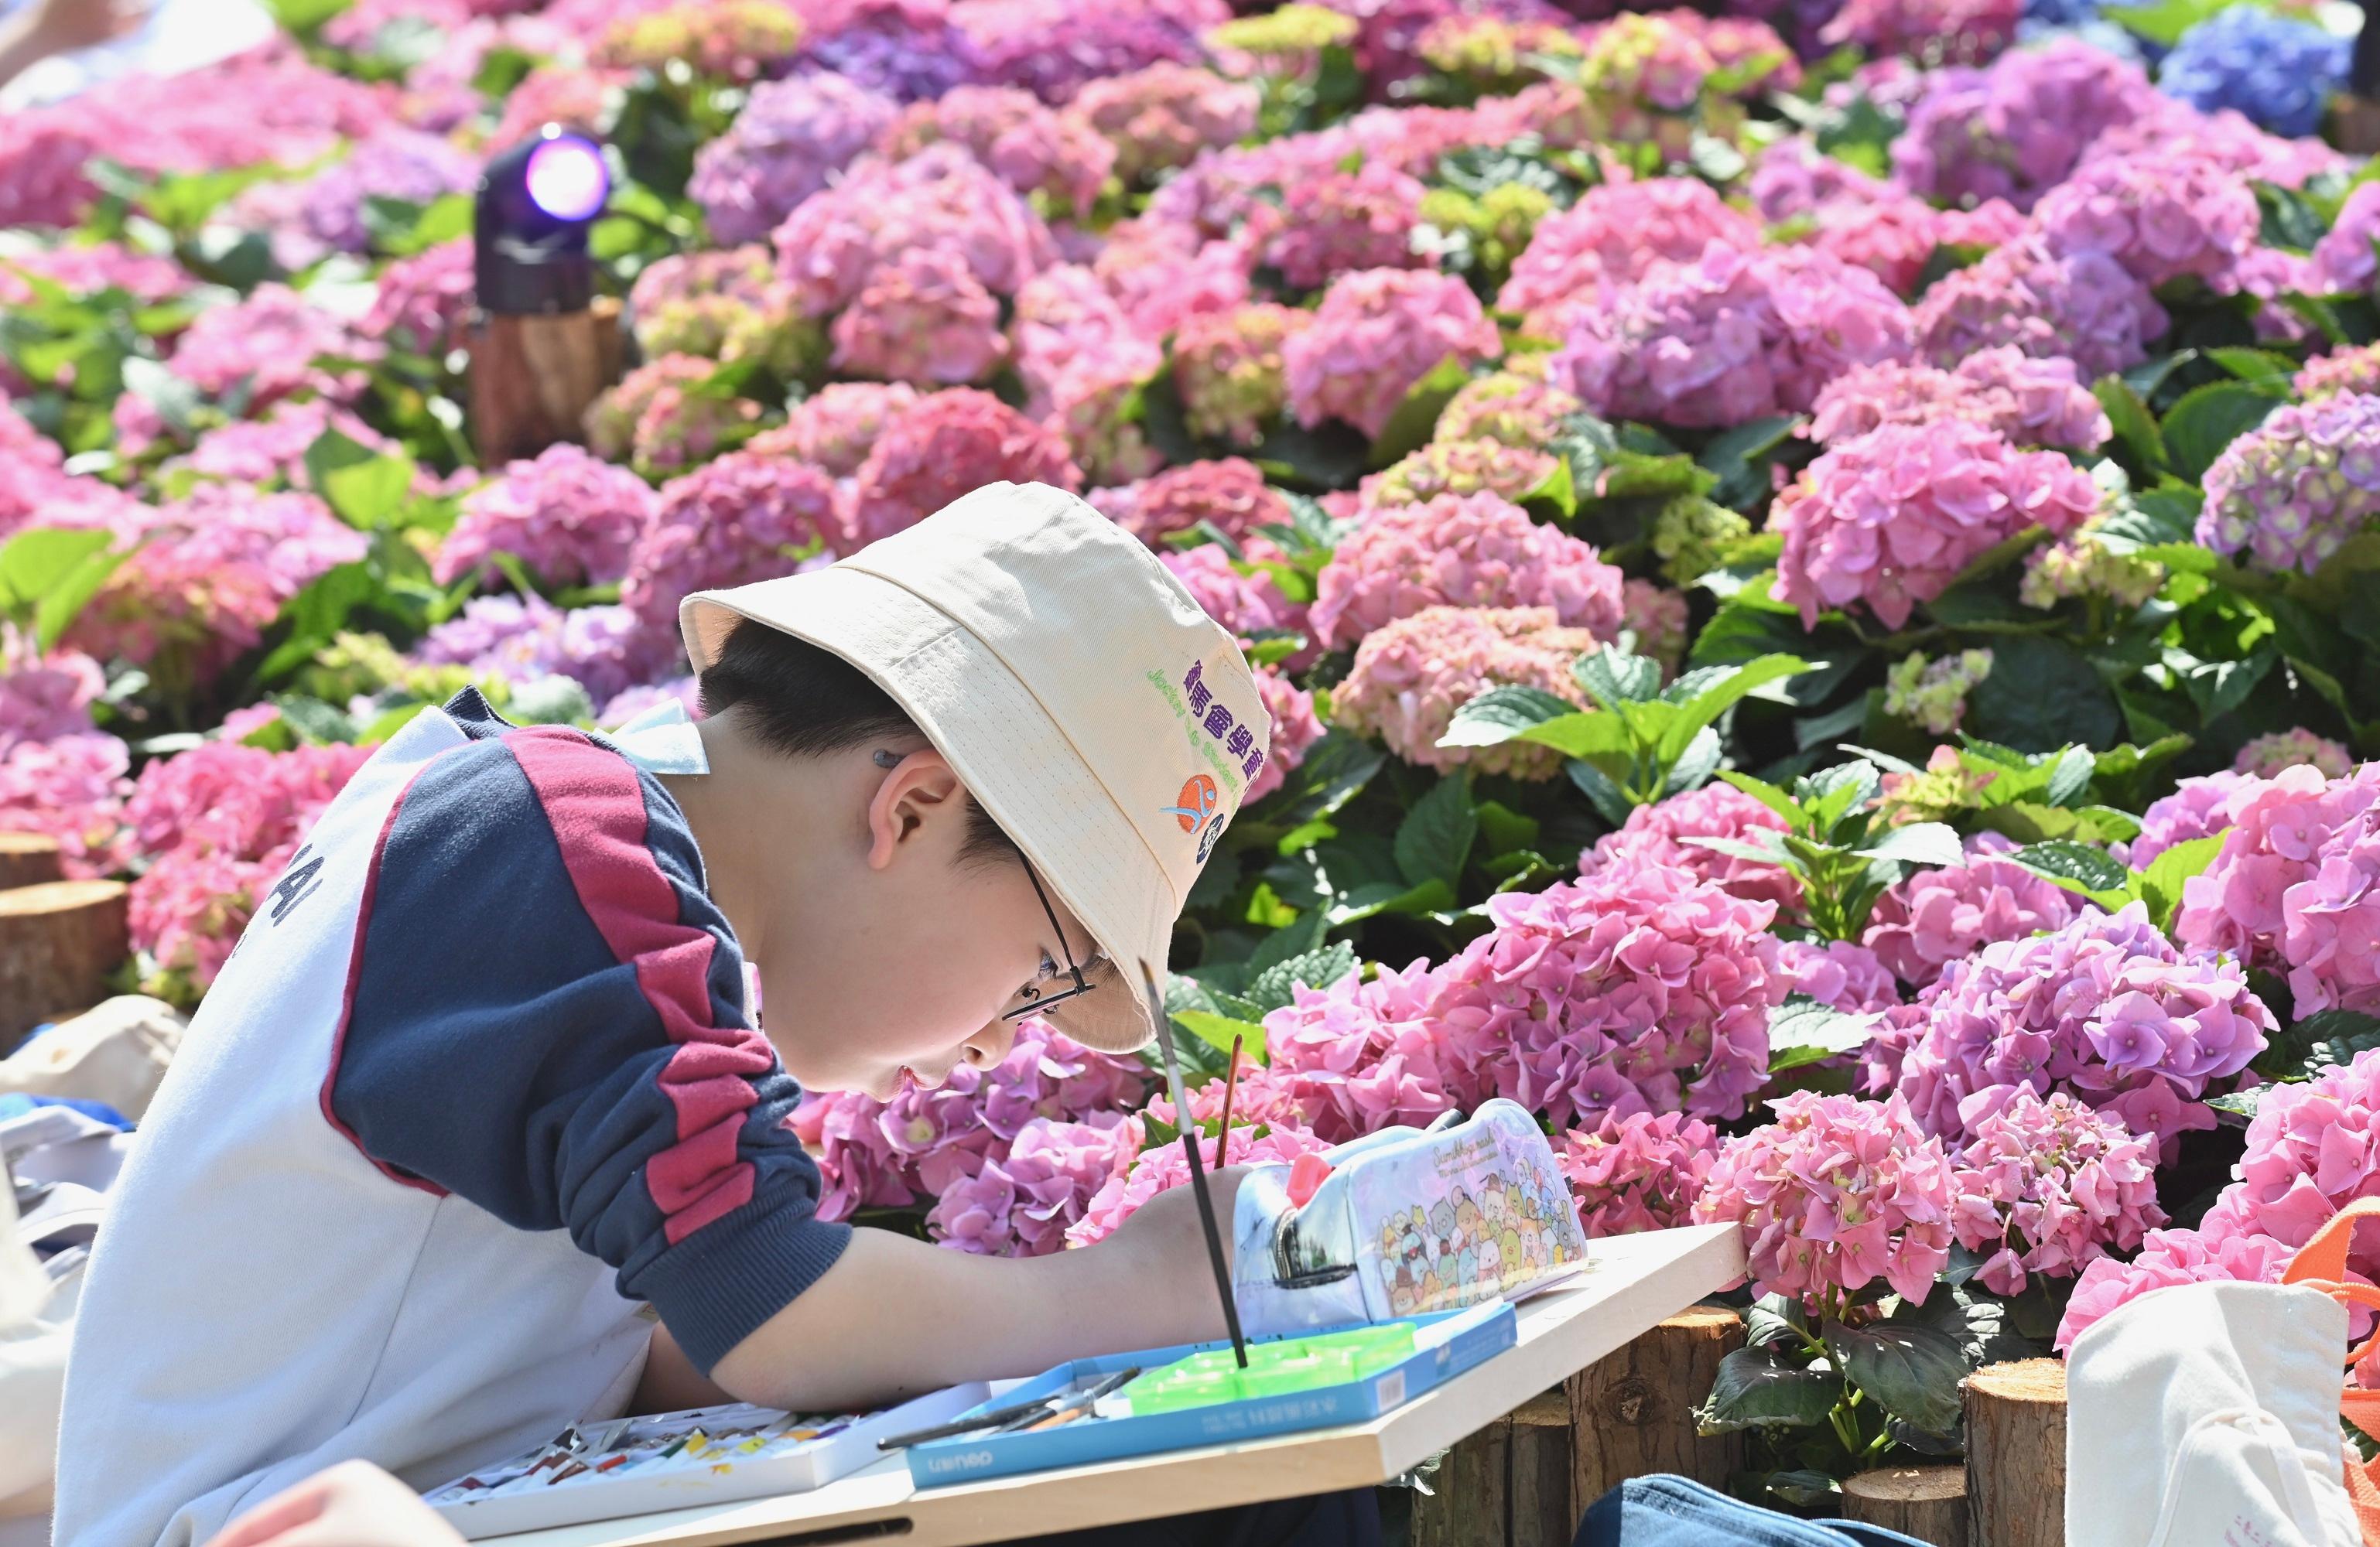 The annual spectacular Hong Kong Flower Show opened at Victoria Park today (March 10) with some 400 000 flowers on display, including about 40 000 hydrangeas as the theme flower. The Jockey Club Student Drawing Competition held today attracted the participation of about 1 600 students.